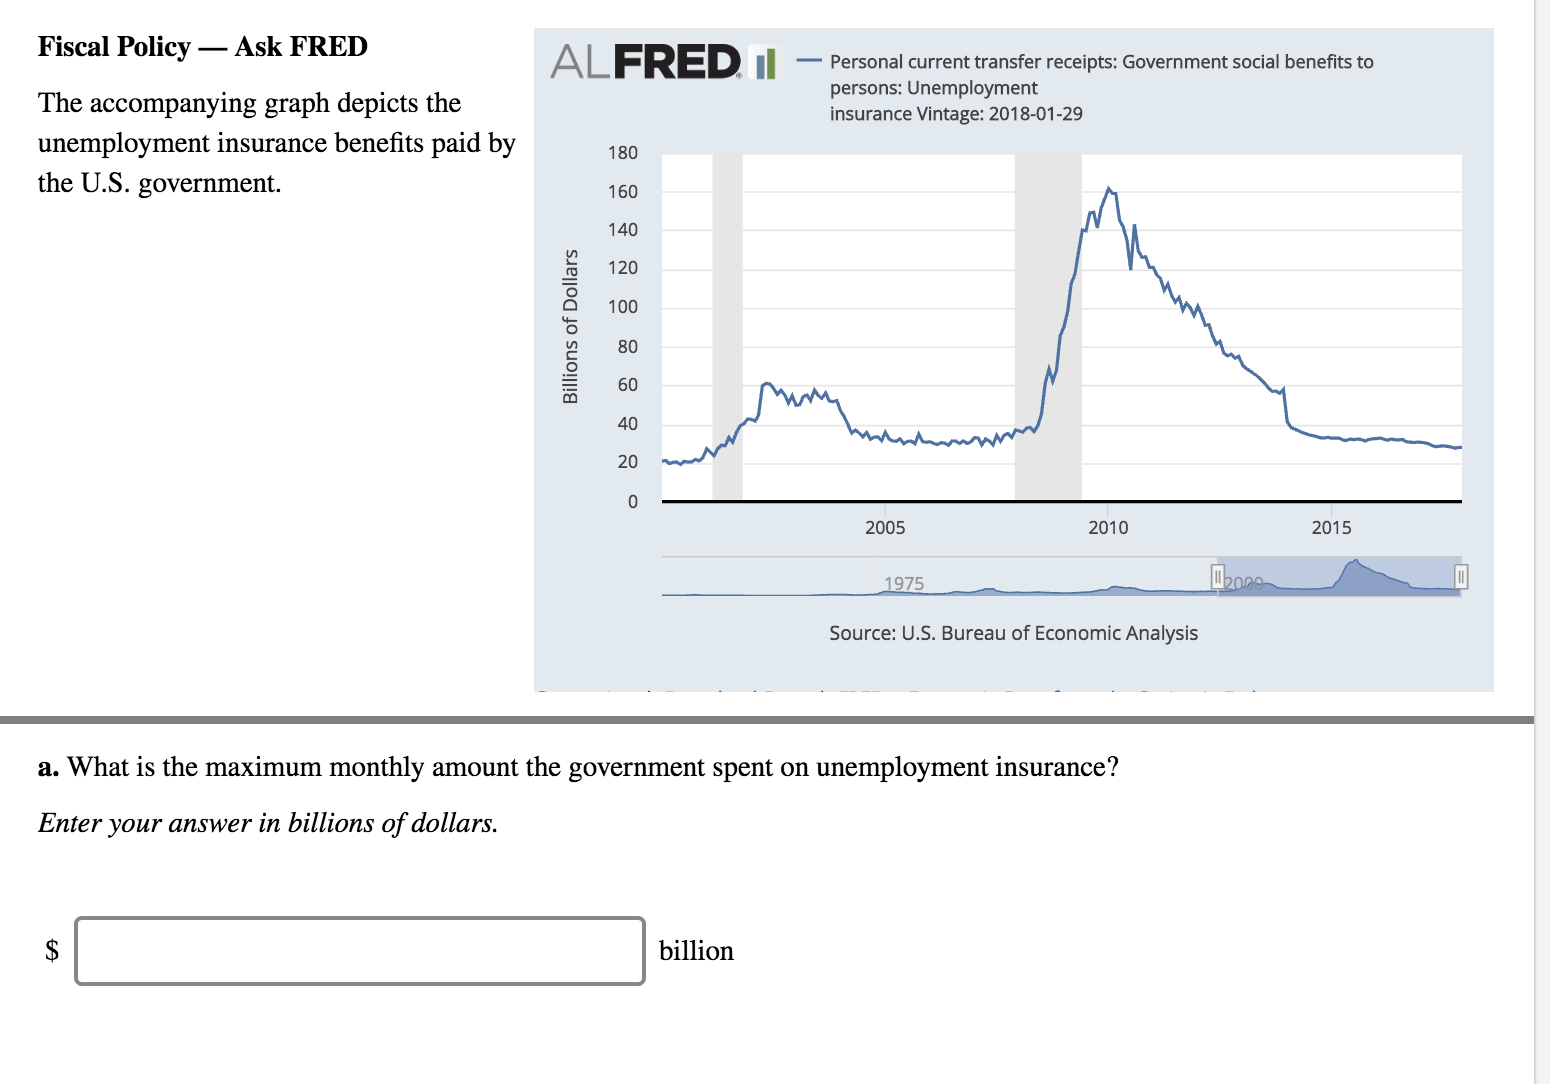 Fiscal Policy- Ask FRED
The accompanying graph depicts the
unemplovment insurance benefits paid bv
the U.S. government.
ALFREDP
Personal current transfer receipts: Government social benefits to
persons: Unemployment
insurance Vintage: 2018-01-29
180
160
140
120
100
60
40
20
2005
2010
2015
975
Source: U.S. Bureau of Economic Analysis
a. What is the maximum monthly amount the government spent on unemployment insurance?
Enter your answer in billions of dollars
billion
